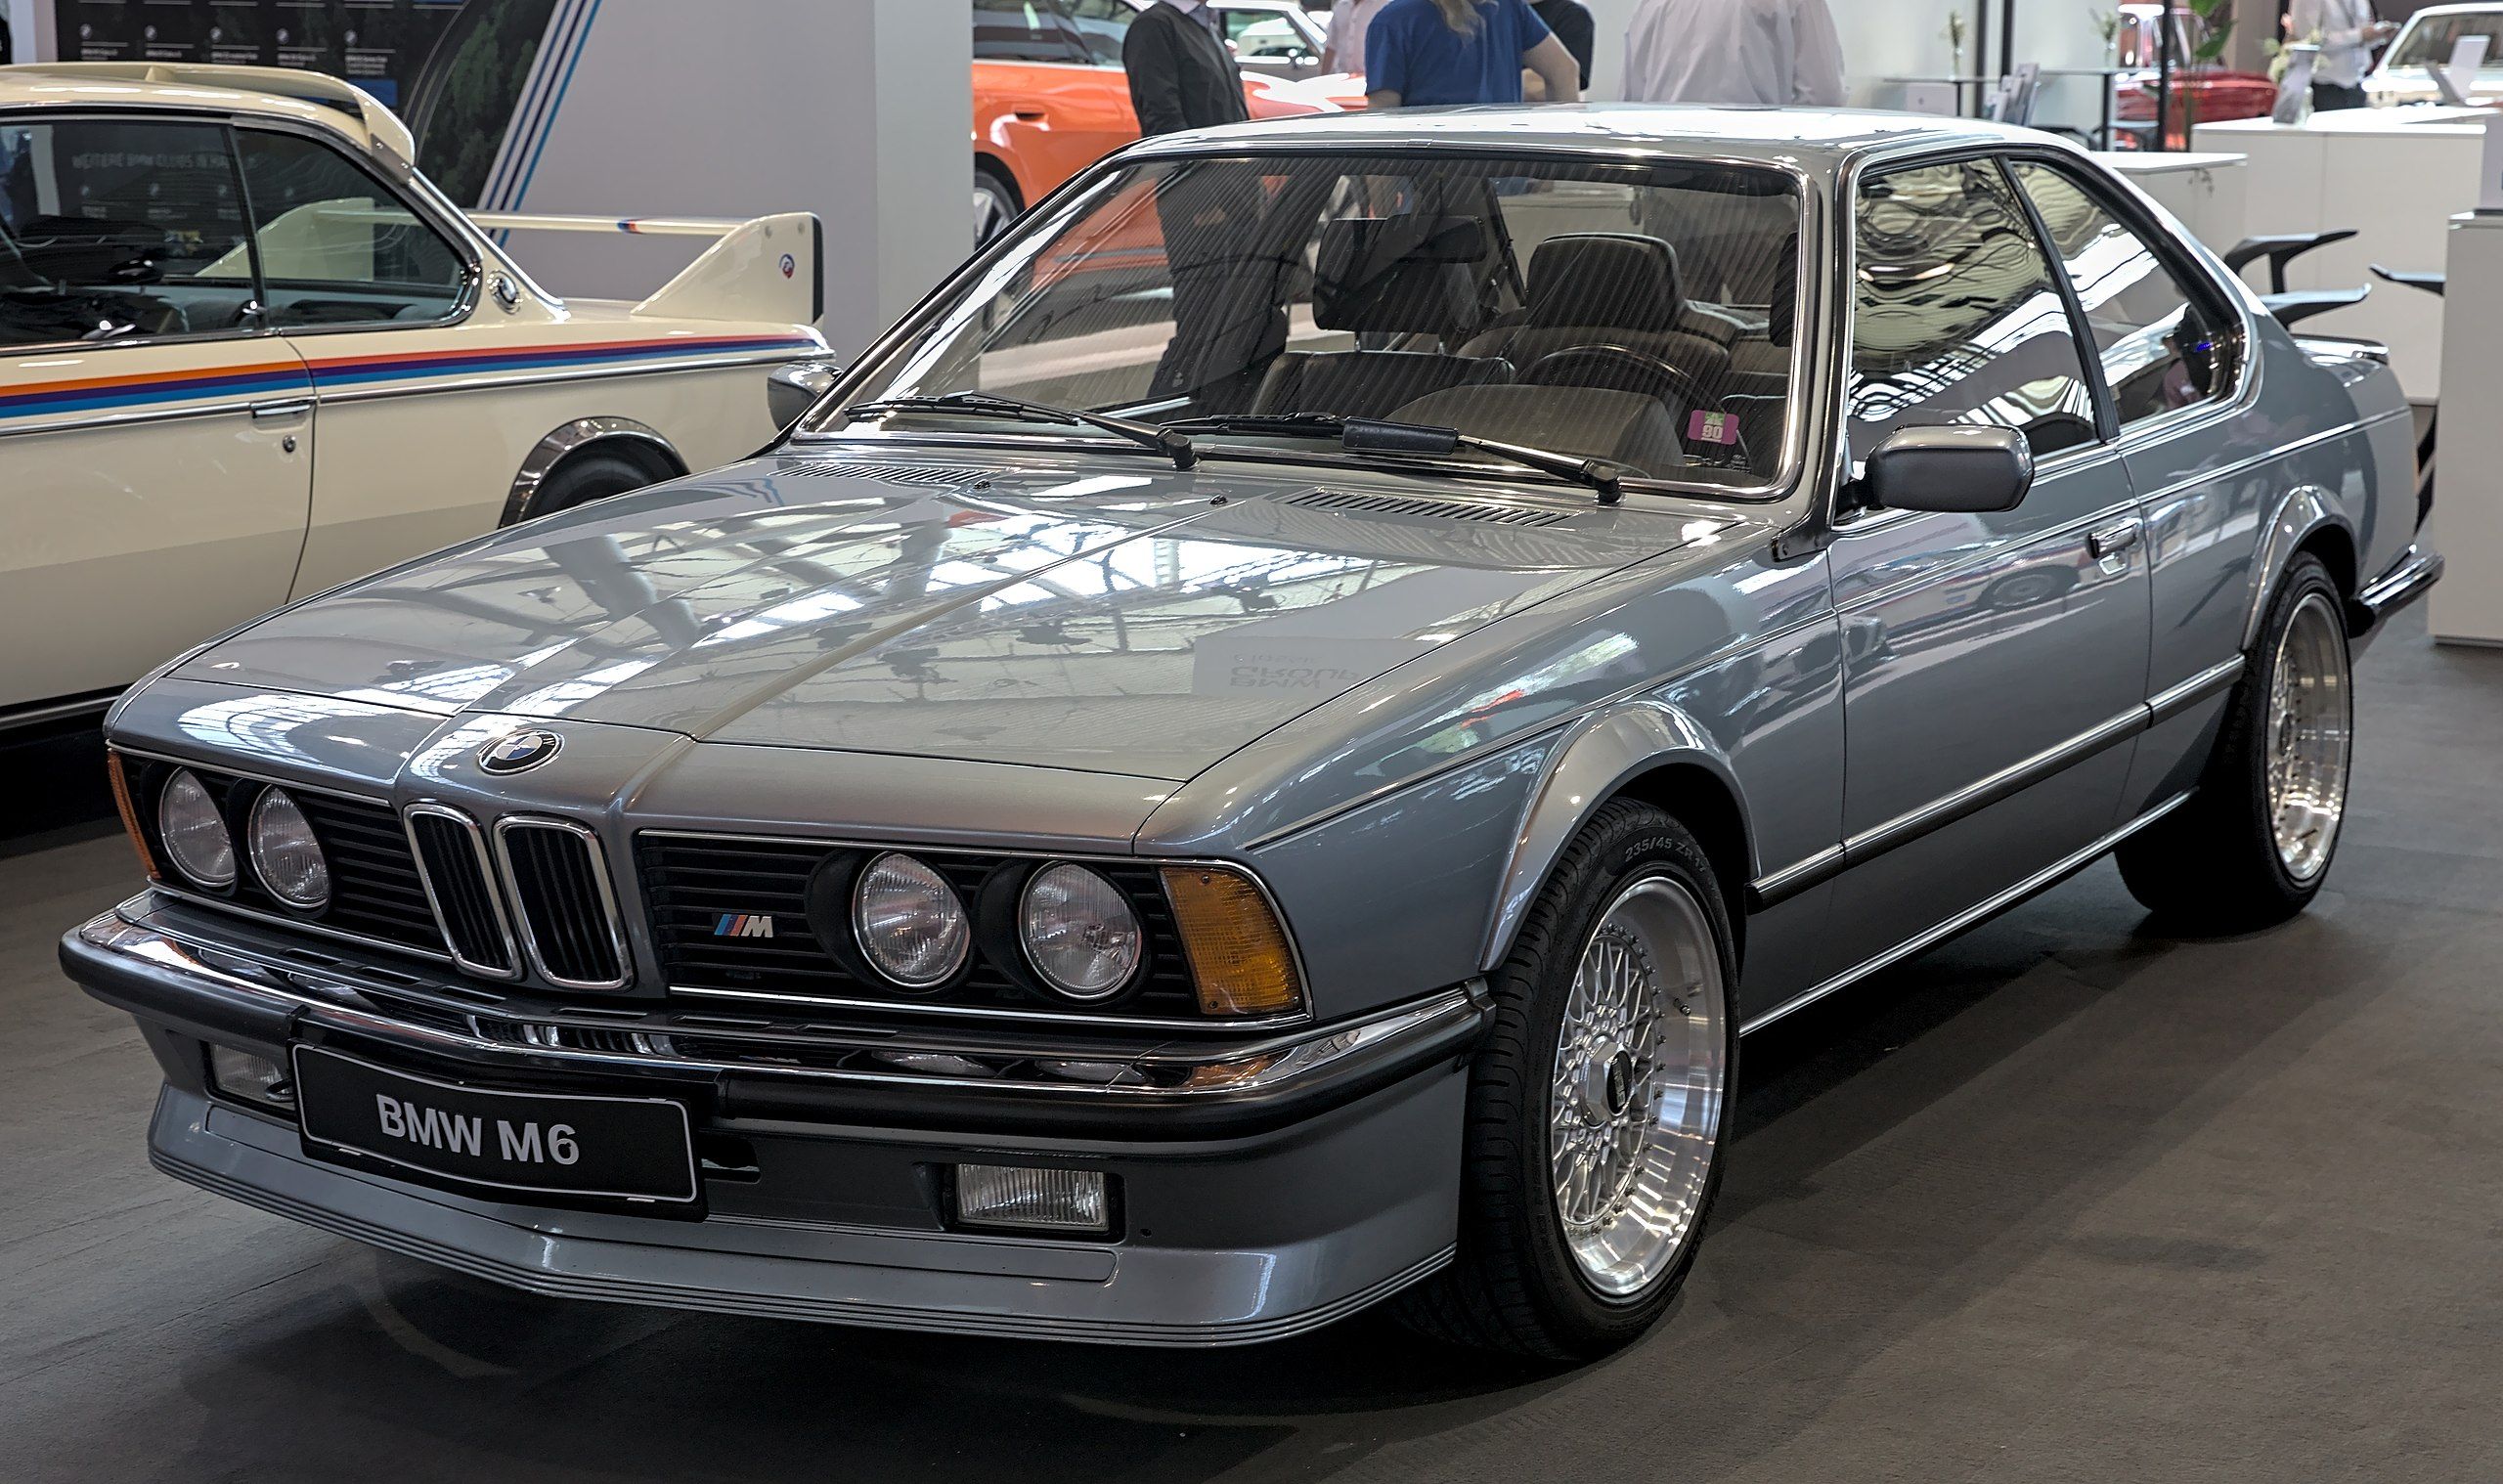 Blue BMW 635CSi E24 parked in showroom